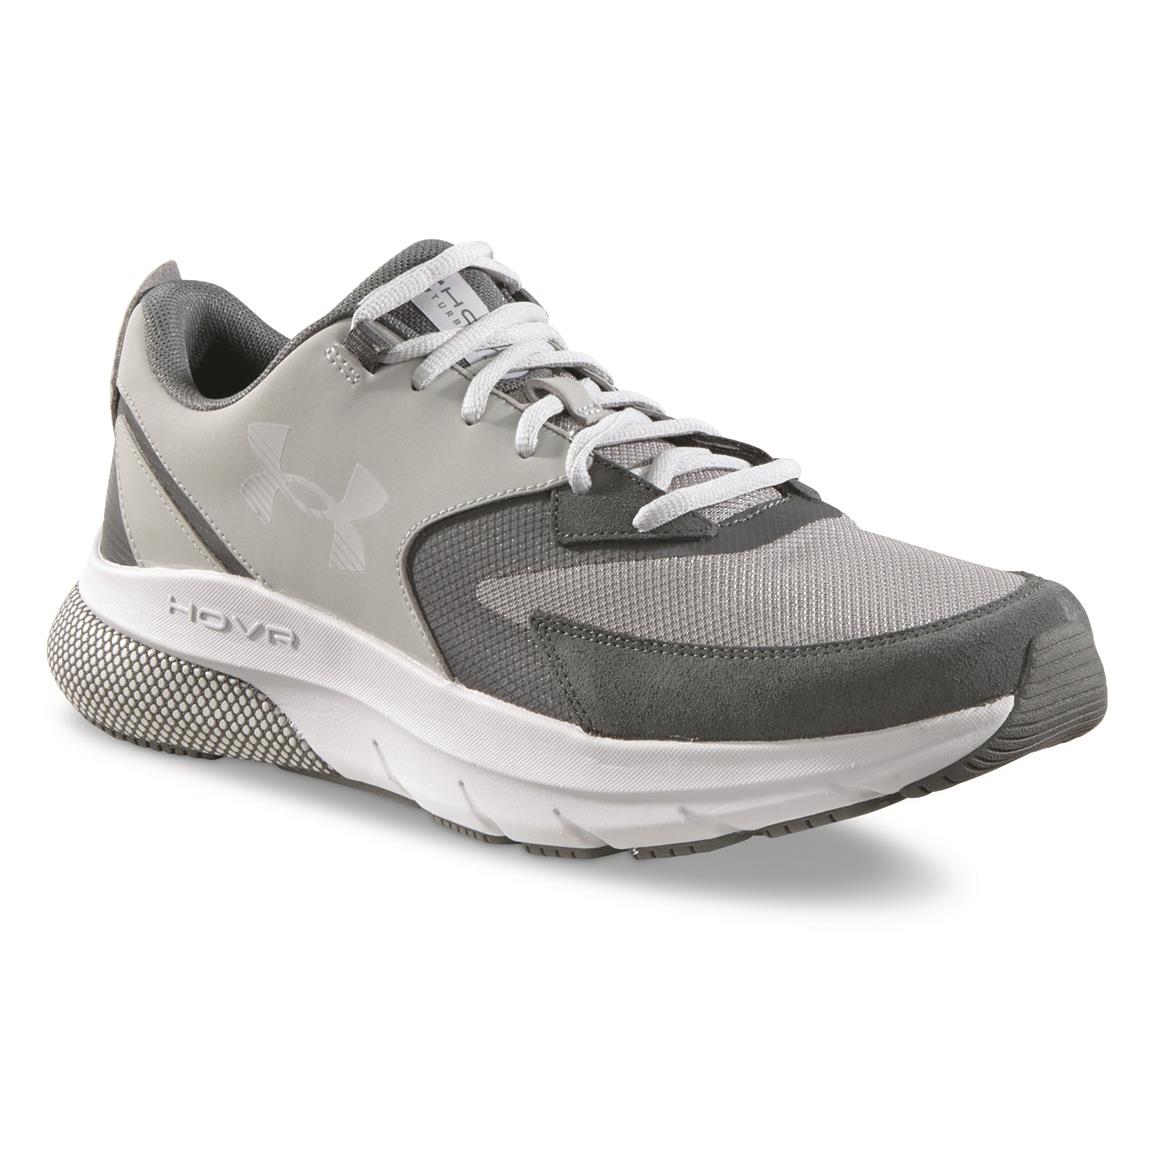 Under Armour Men's HOVR Turbulence Running Shoes - 732974, Running ...